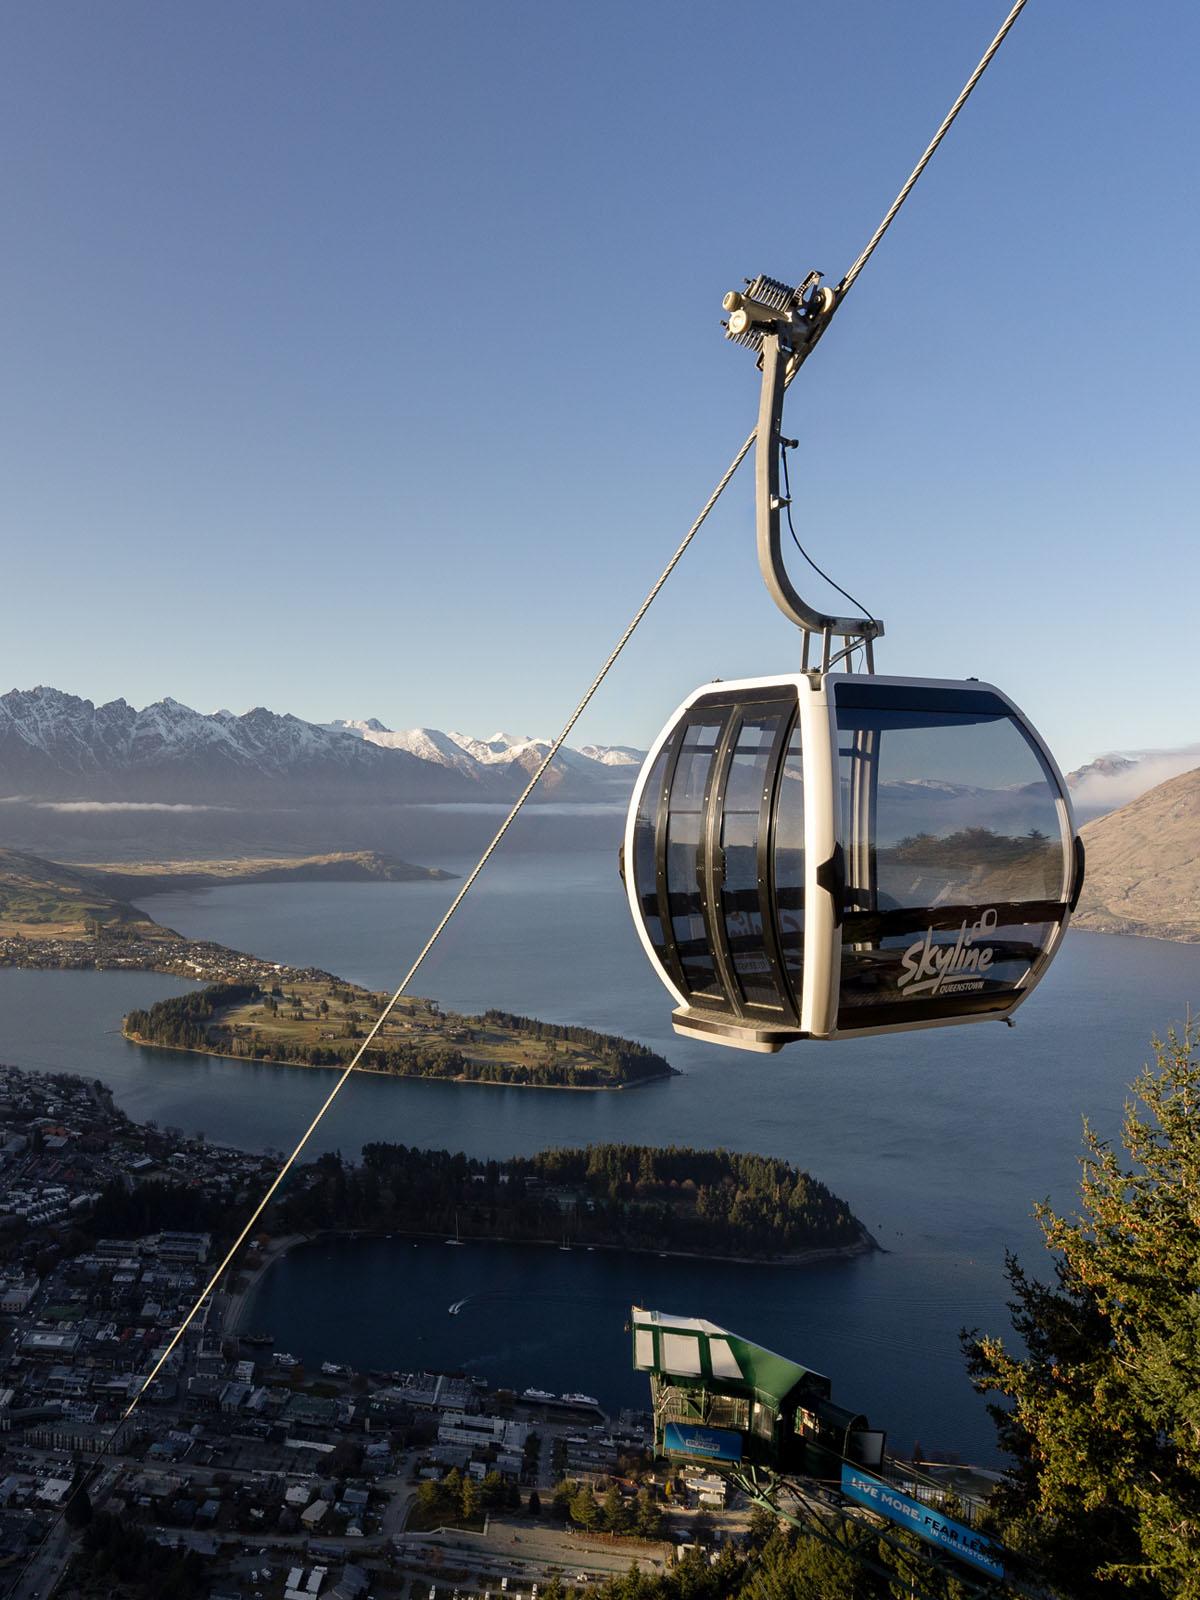 Image of Gondola going up the mountain with spectacular views of Queenstown